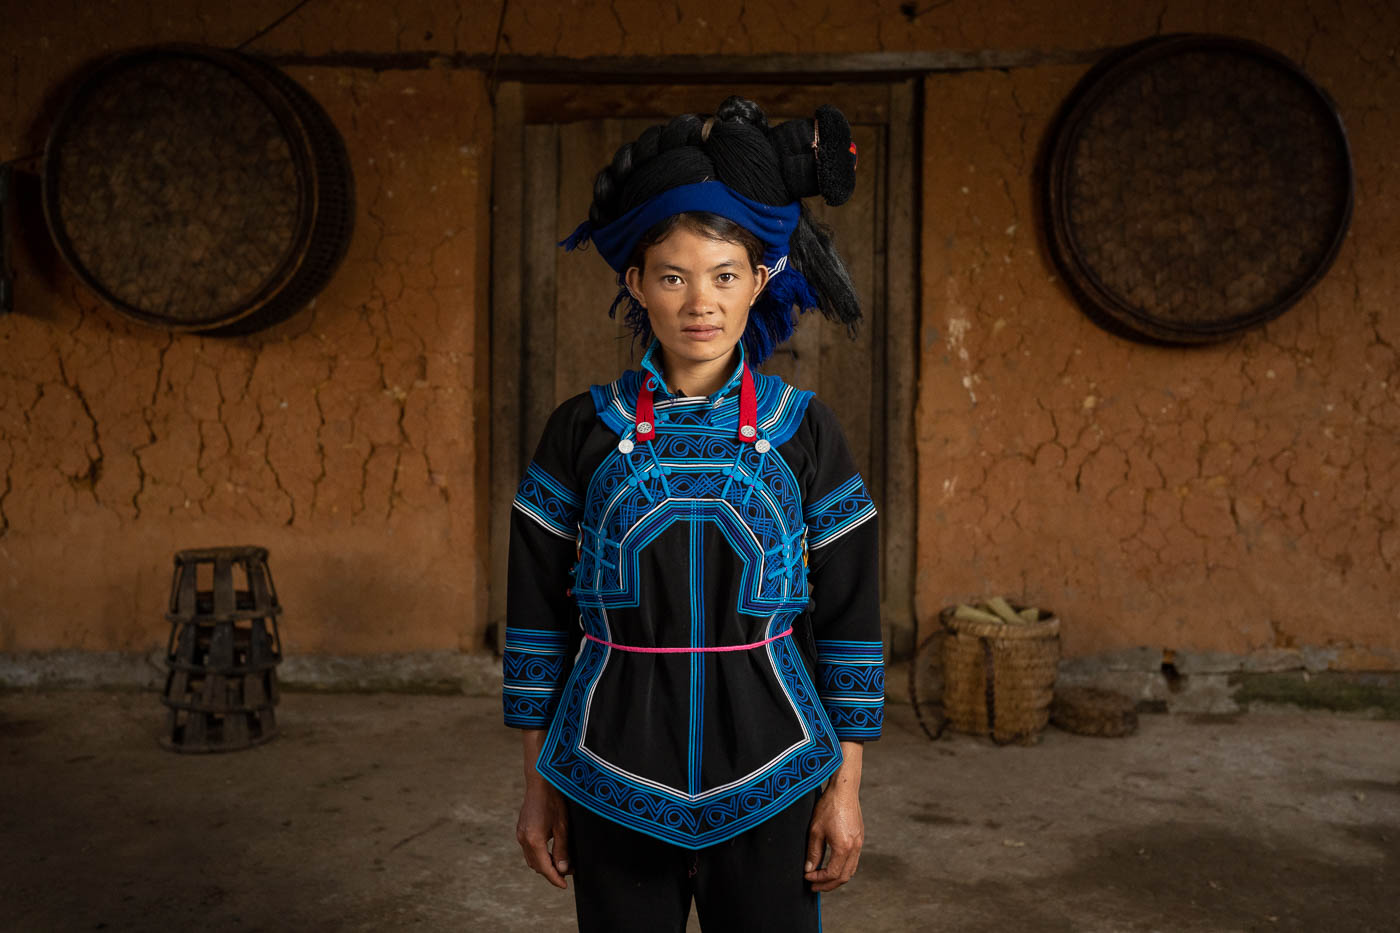 Woman from the Black Ha Nhi Ethnic Group in Vietnam